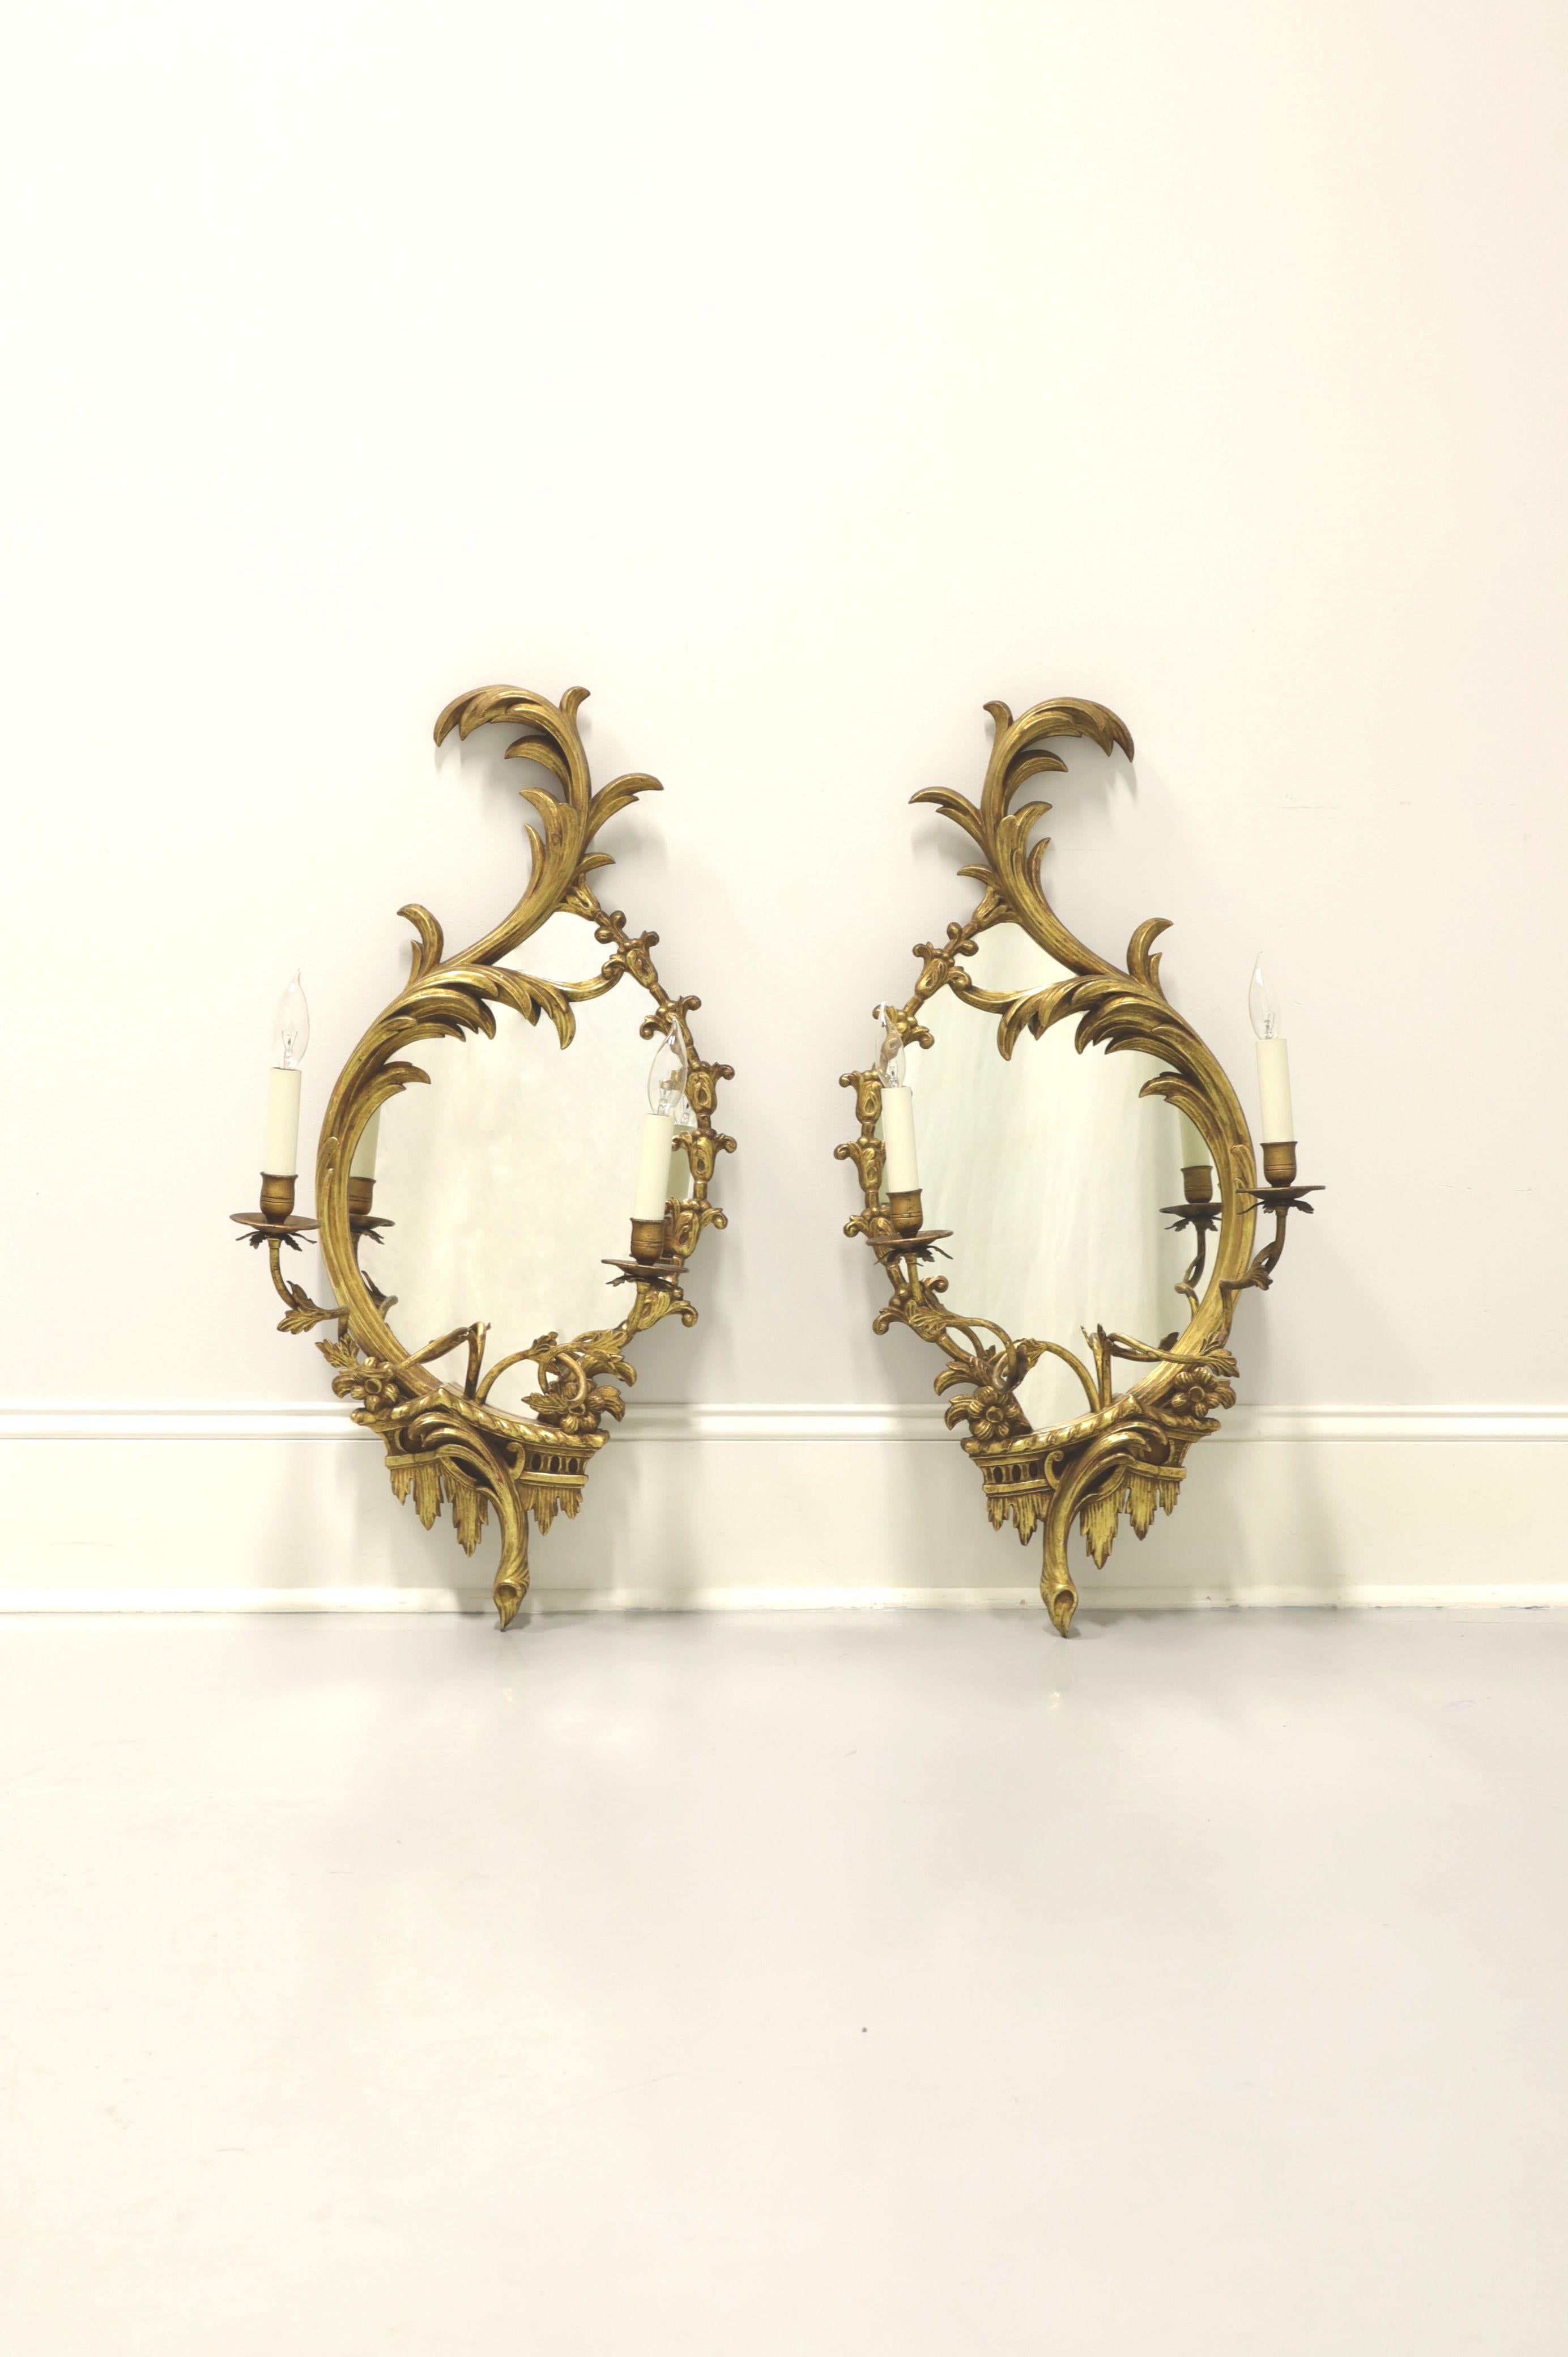 A pair of antique Baroque style electrified candle mirror wall sconces, unbranded. Mirror glass, wood frame, metal arms, brass candleholders, bulb sleeves and small bulb sockets. Features gold painted decoratively carved wood frame and scultped